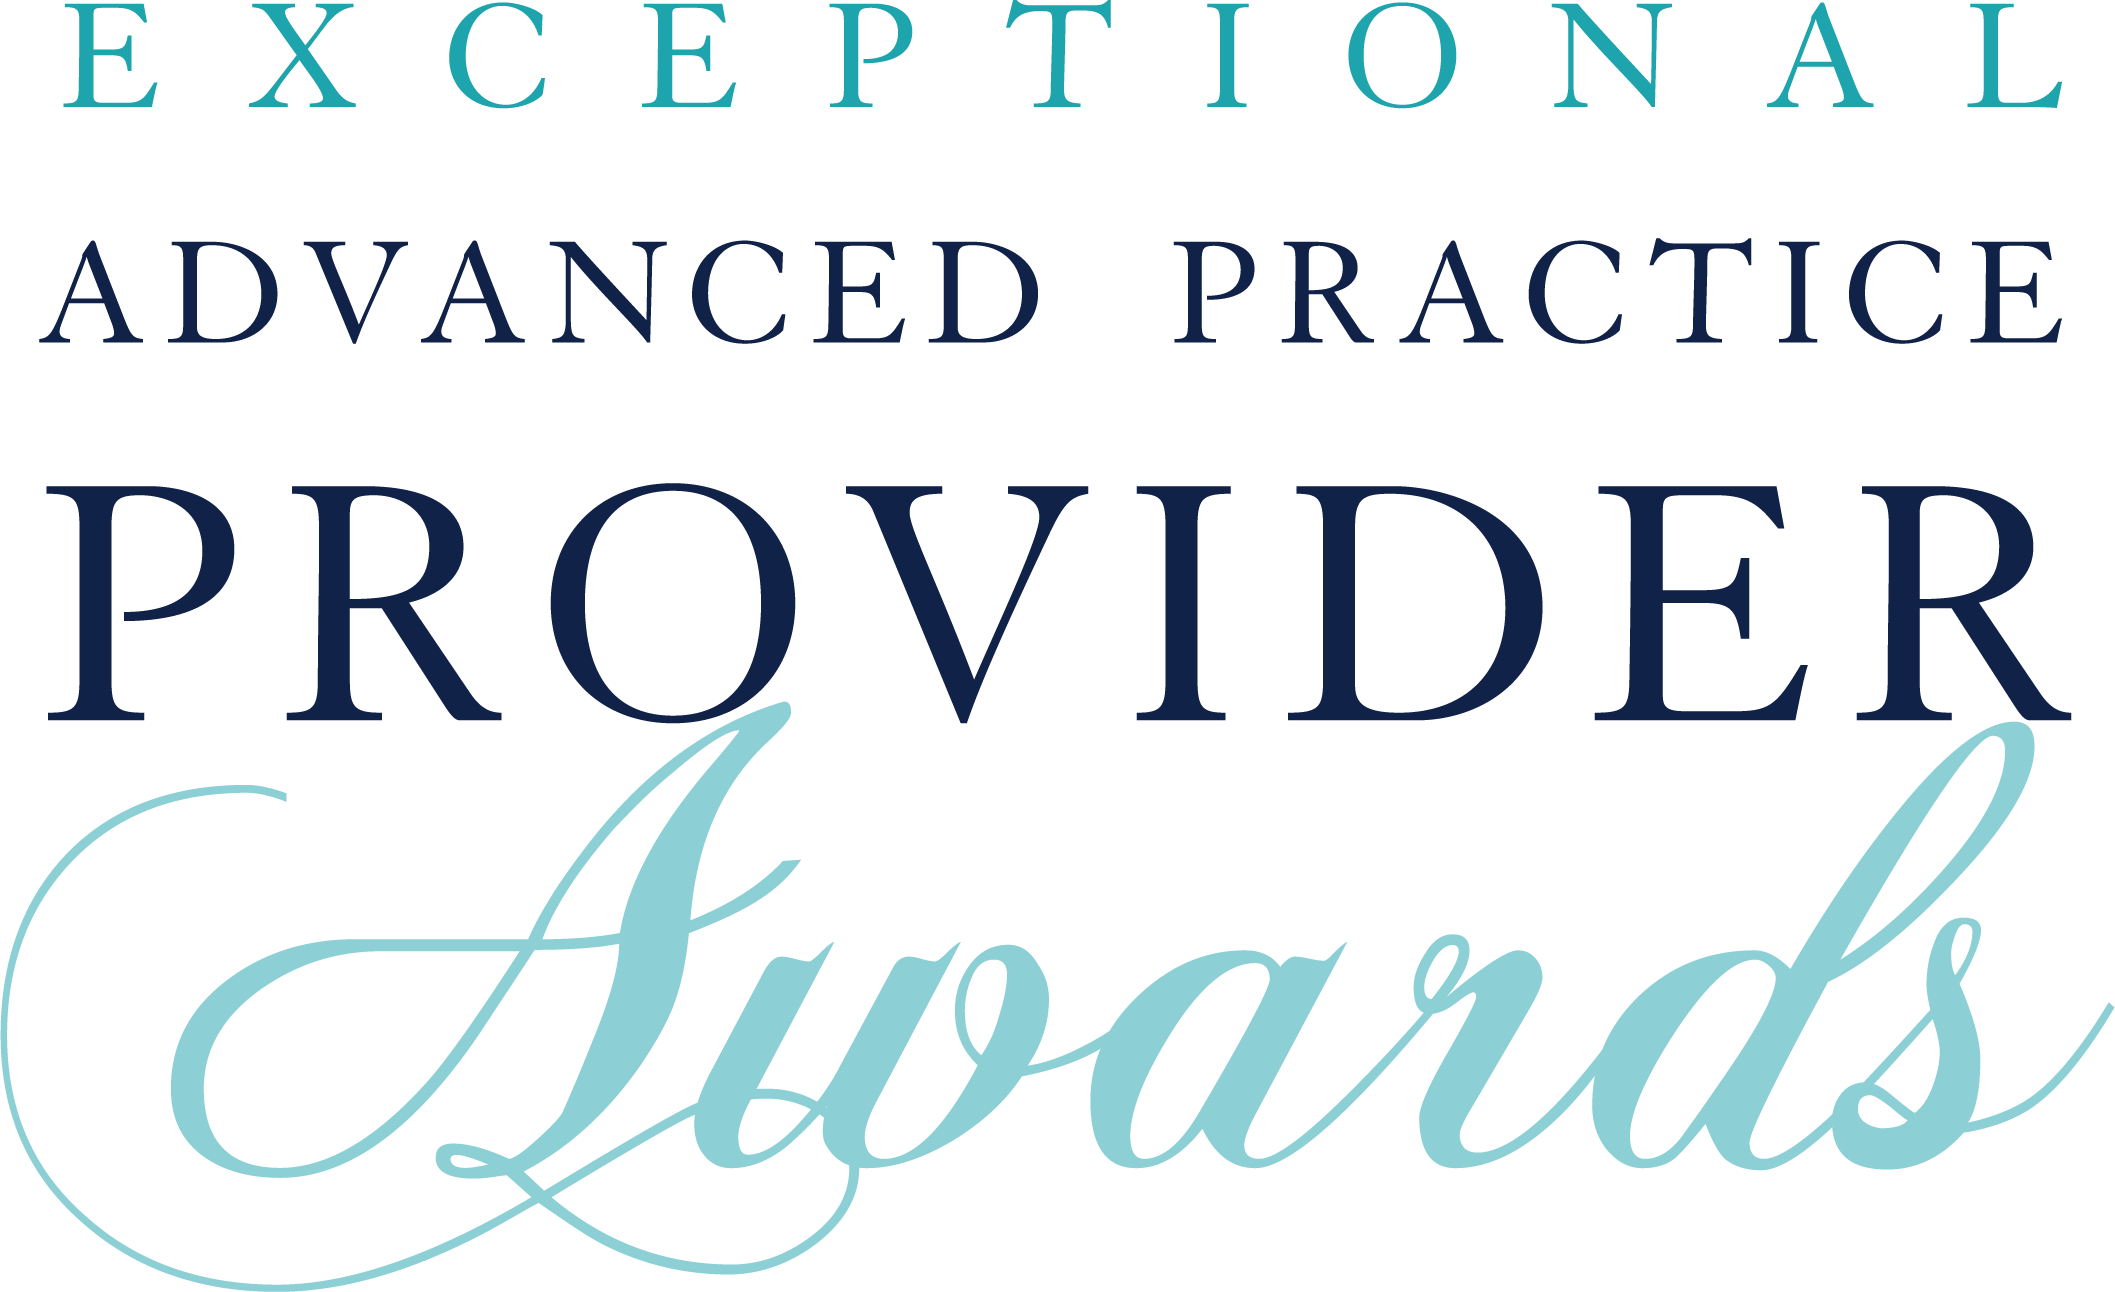 Exceptional Advanced Practice Provider Awards logo